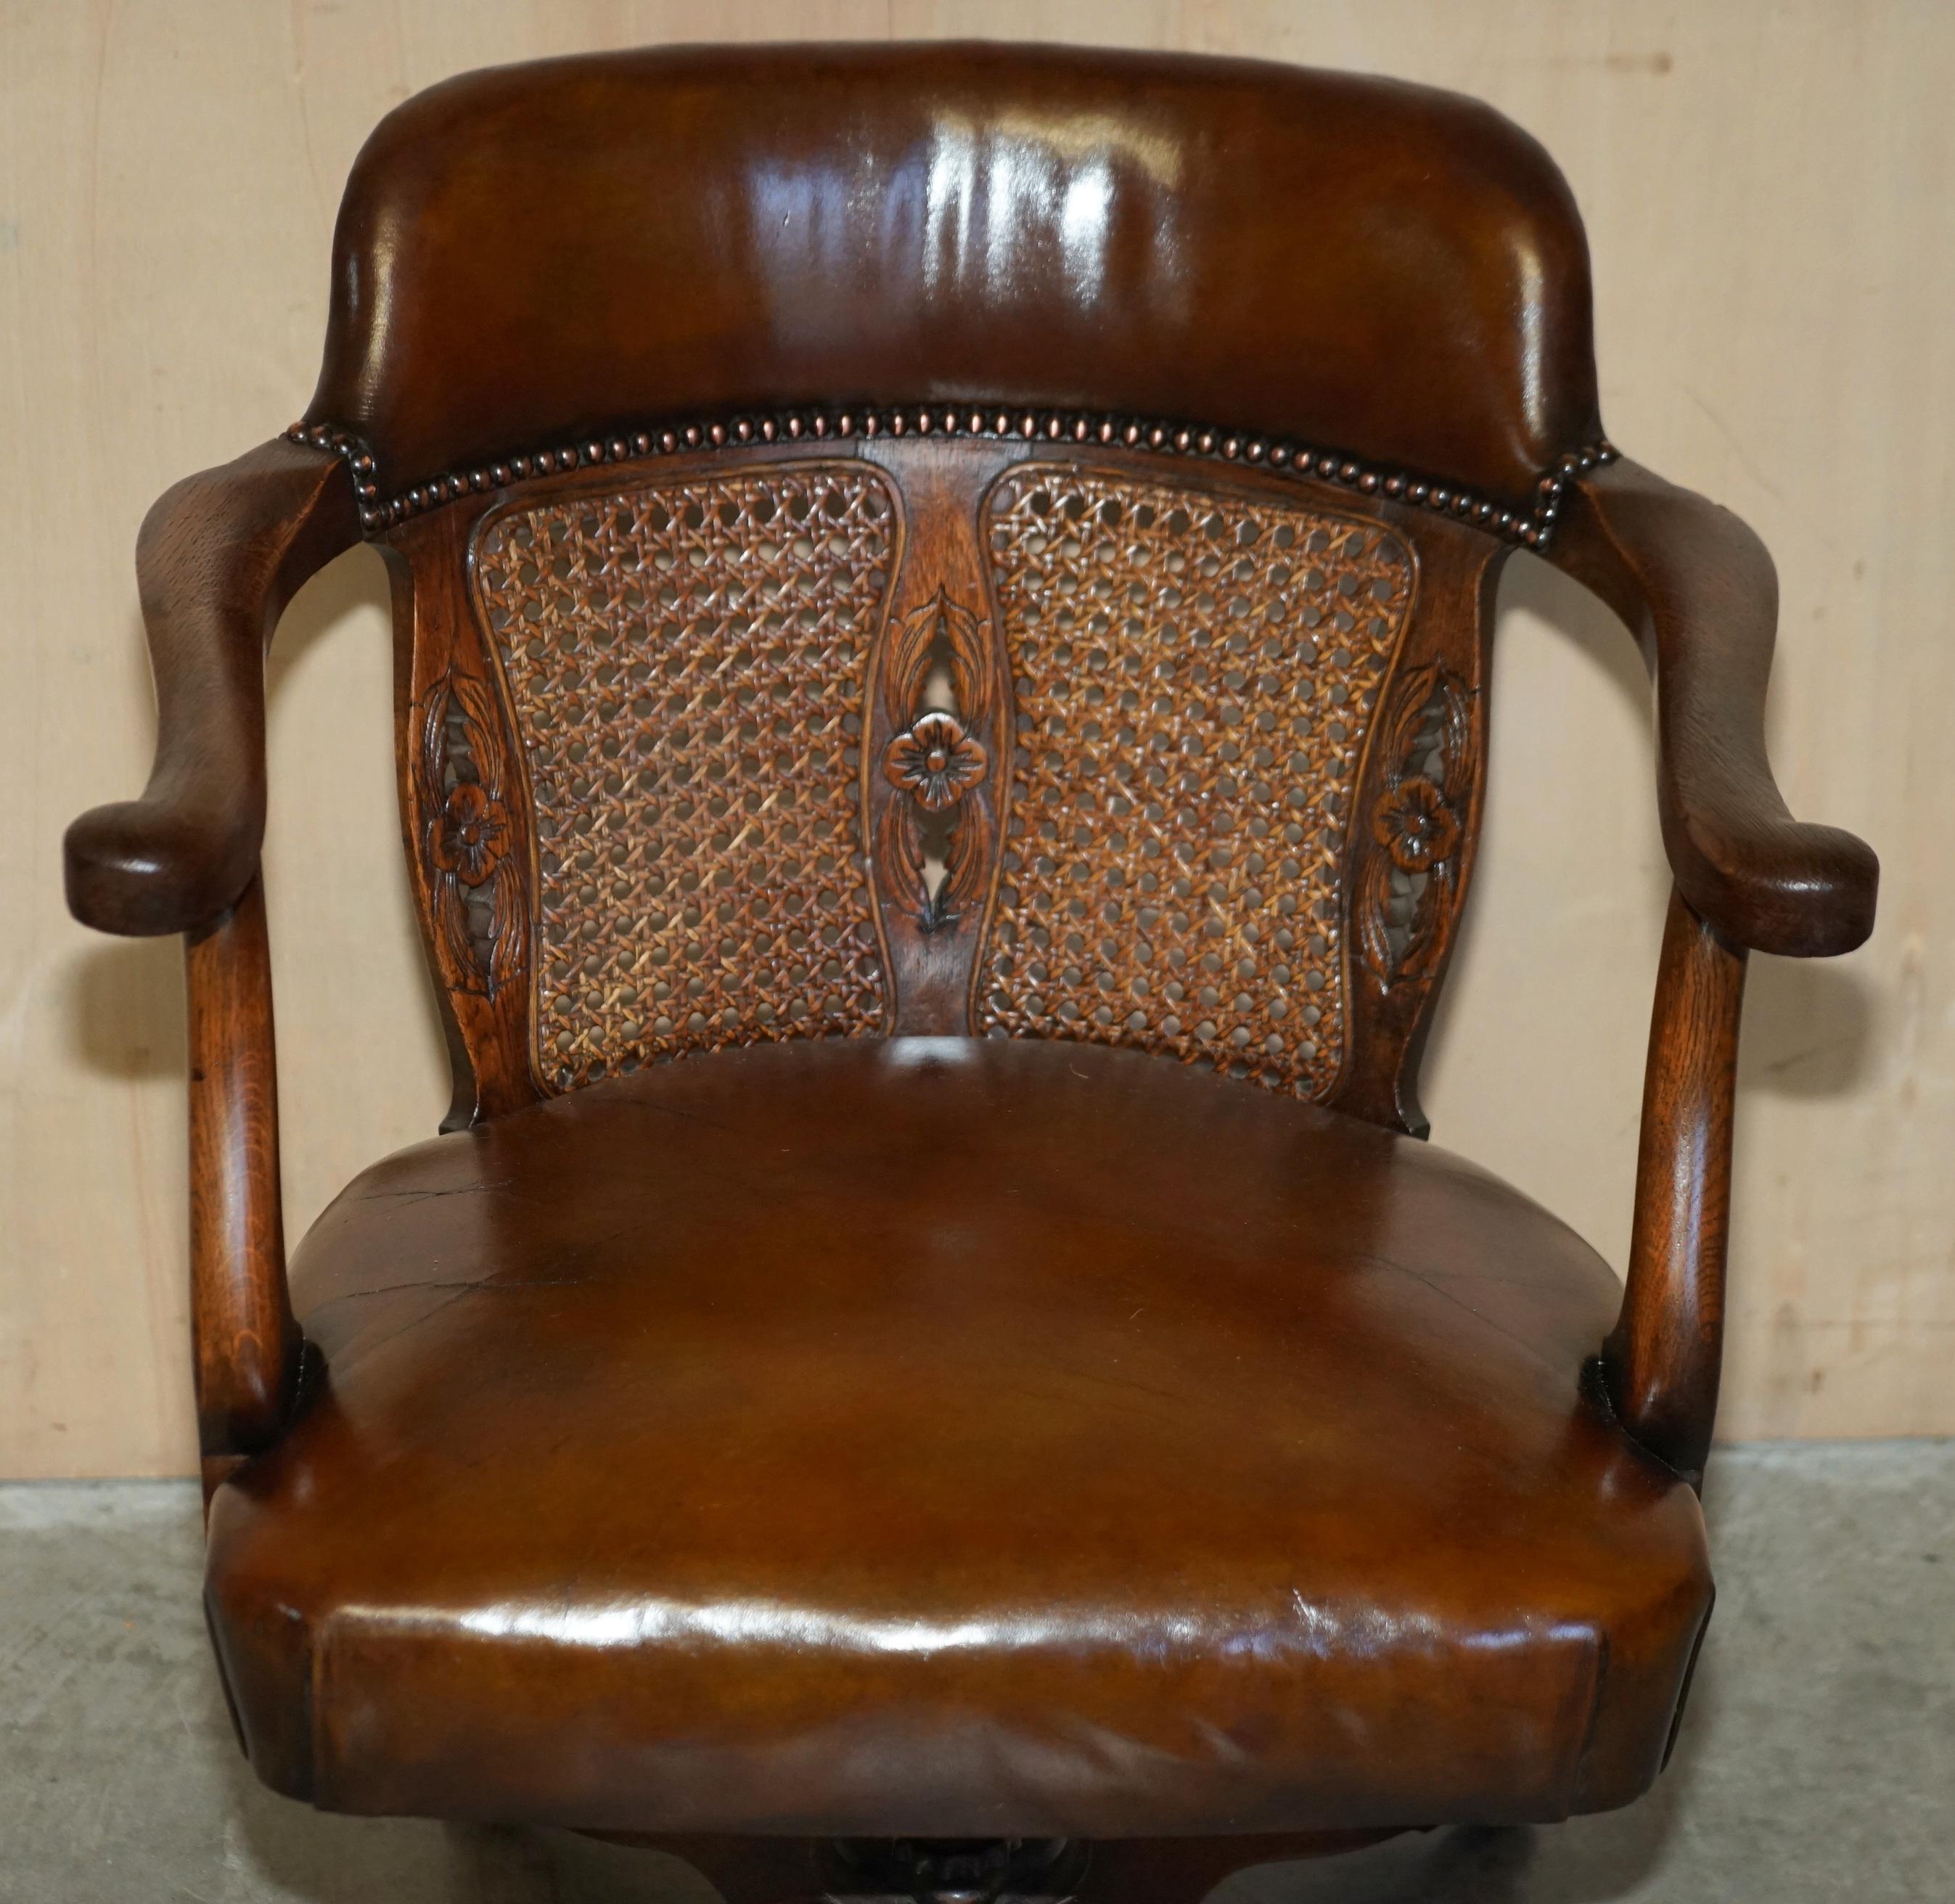 High Victorian RESTORED ANTIQUE CIRCA 1880 BERGERE & BROWN LEATHER BARREL BACK CAPTAiNS CHAIR For Sale